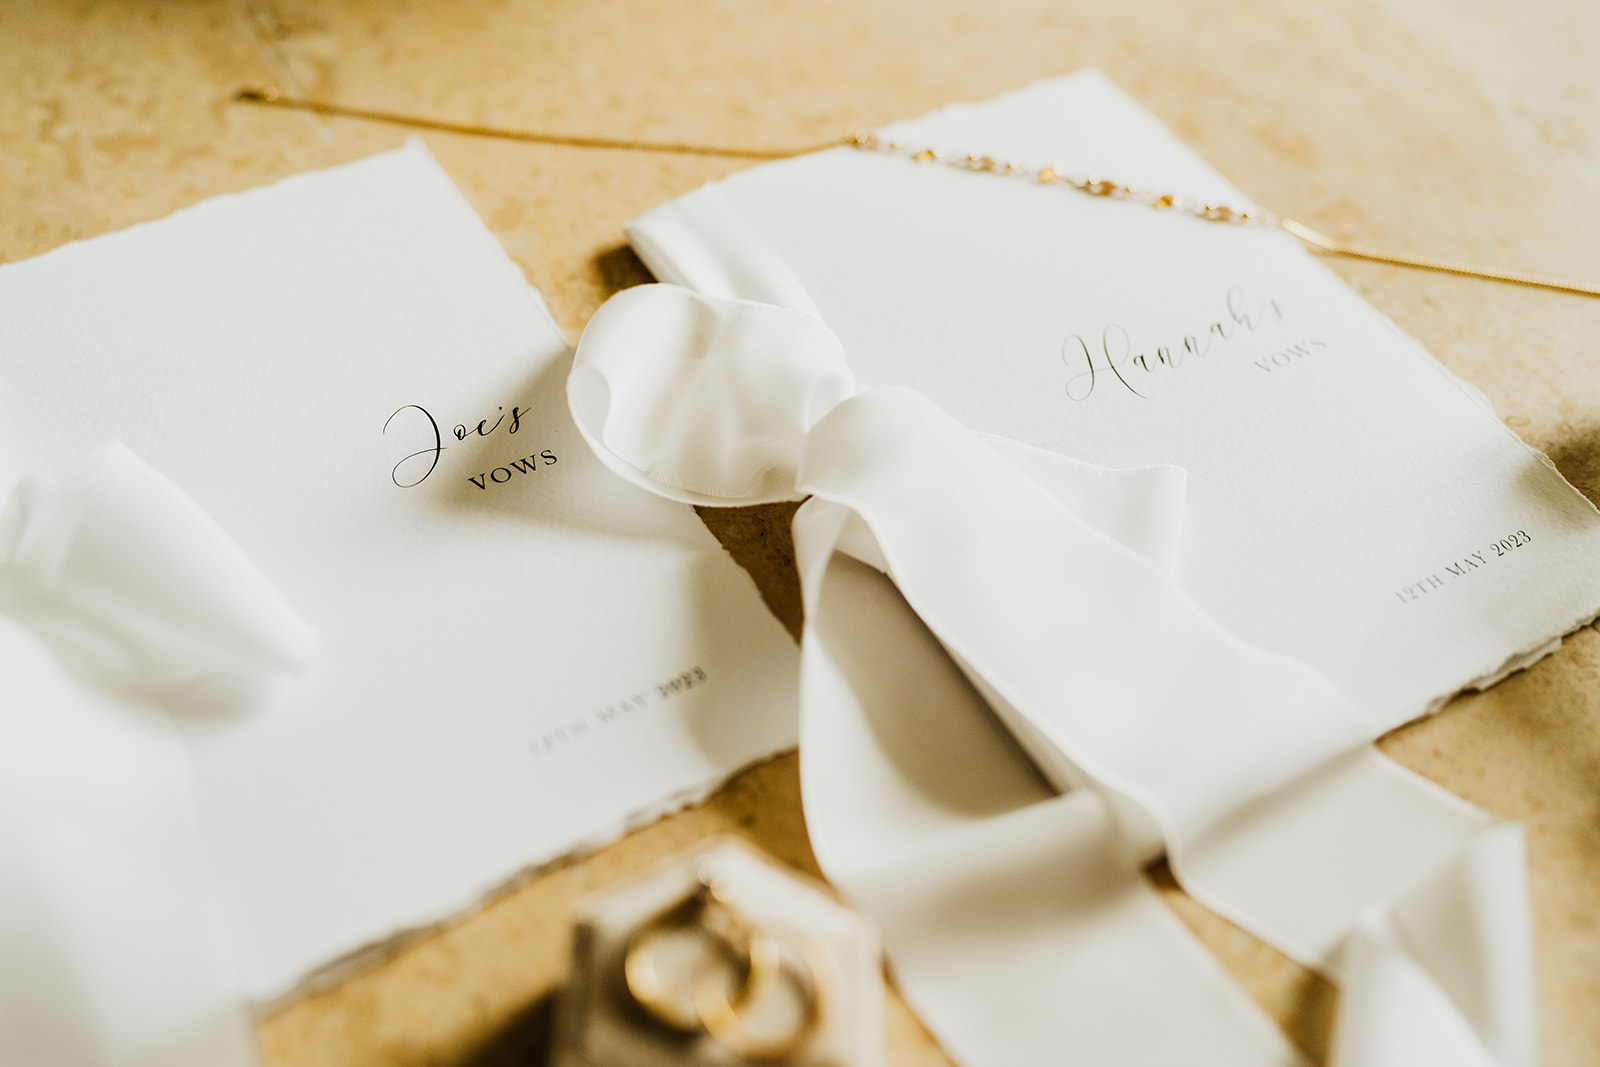 vow cards laying on table with other details like a necklace and ribbon